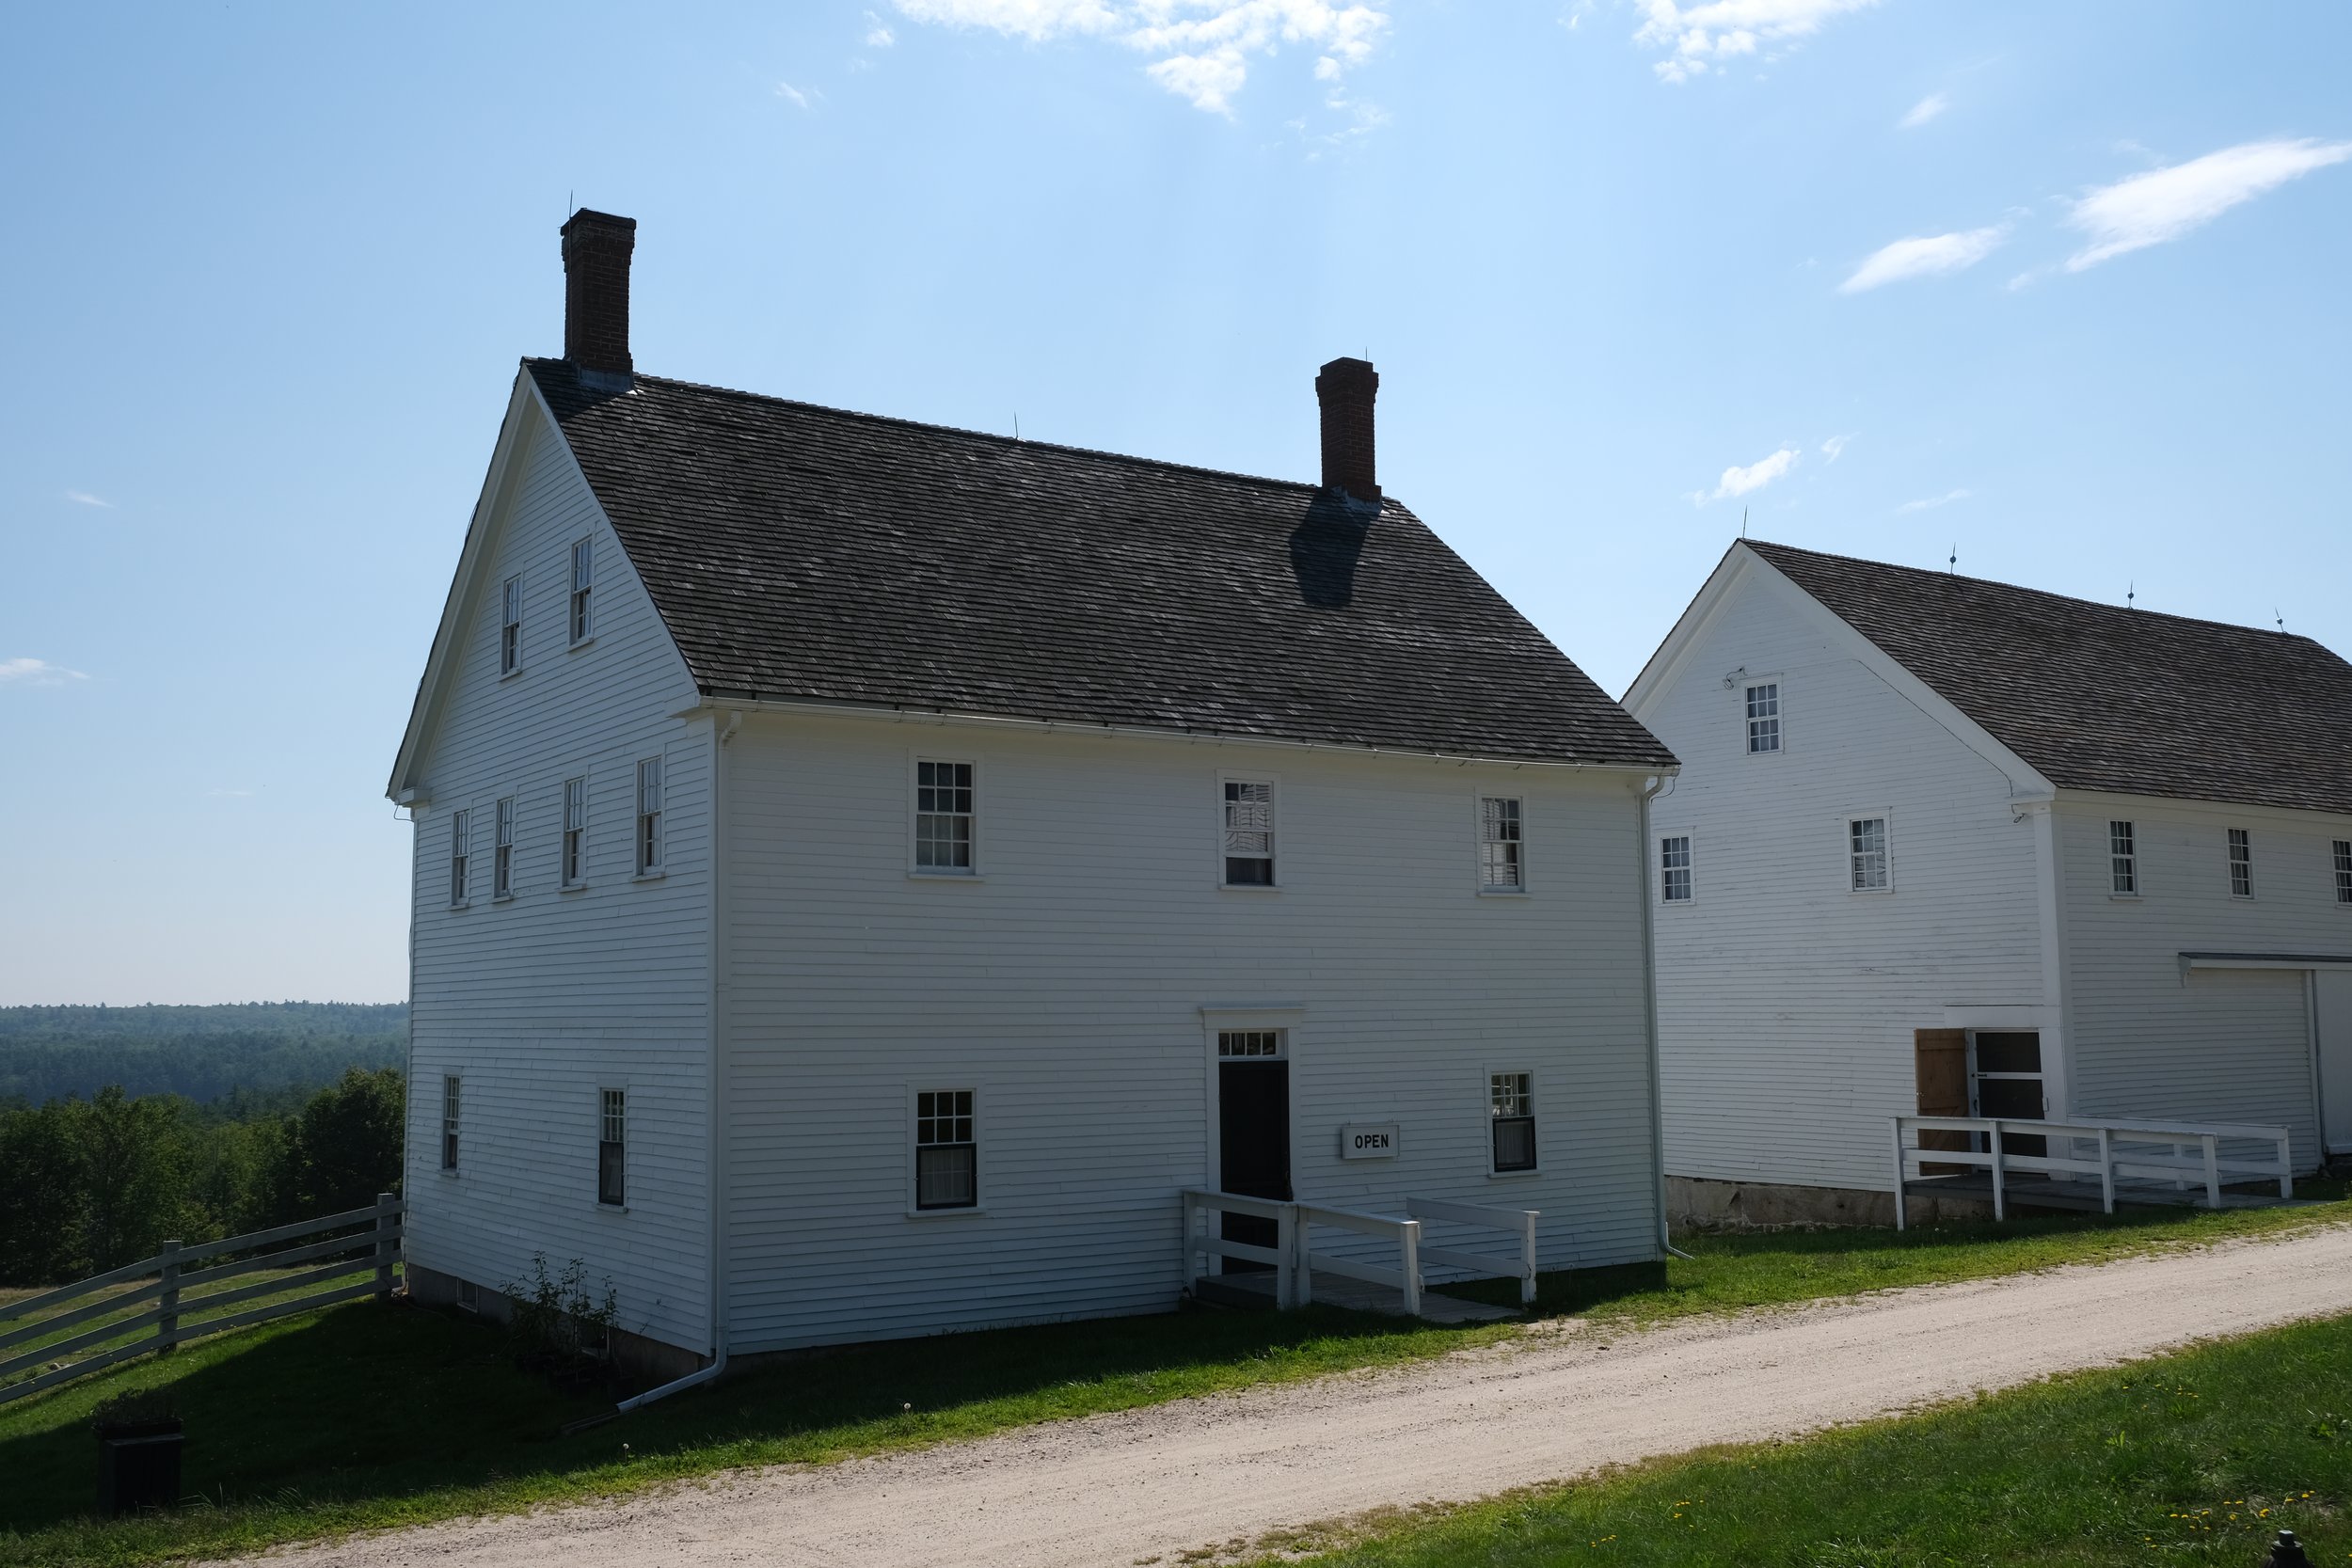   Old homes serving as the Shaker Village gift shop.  